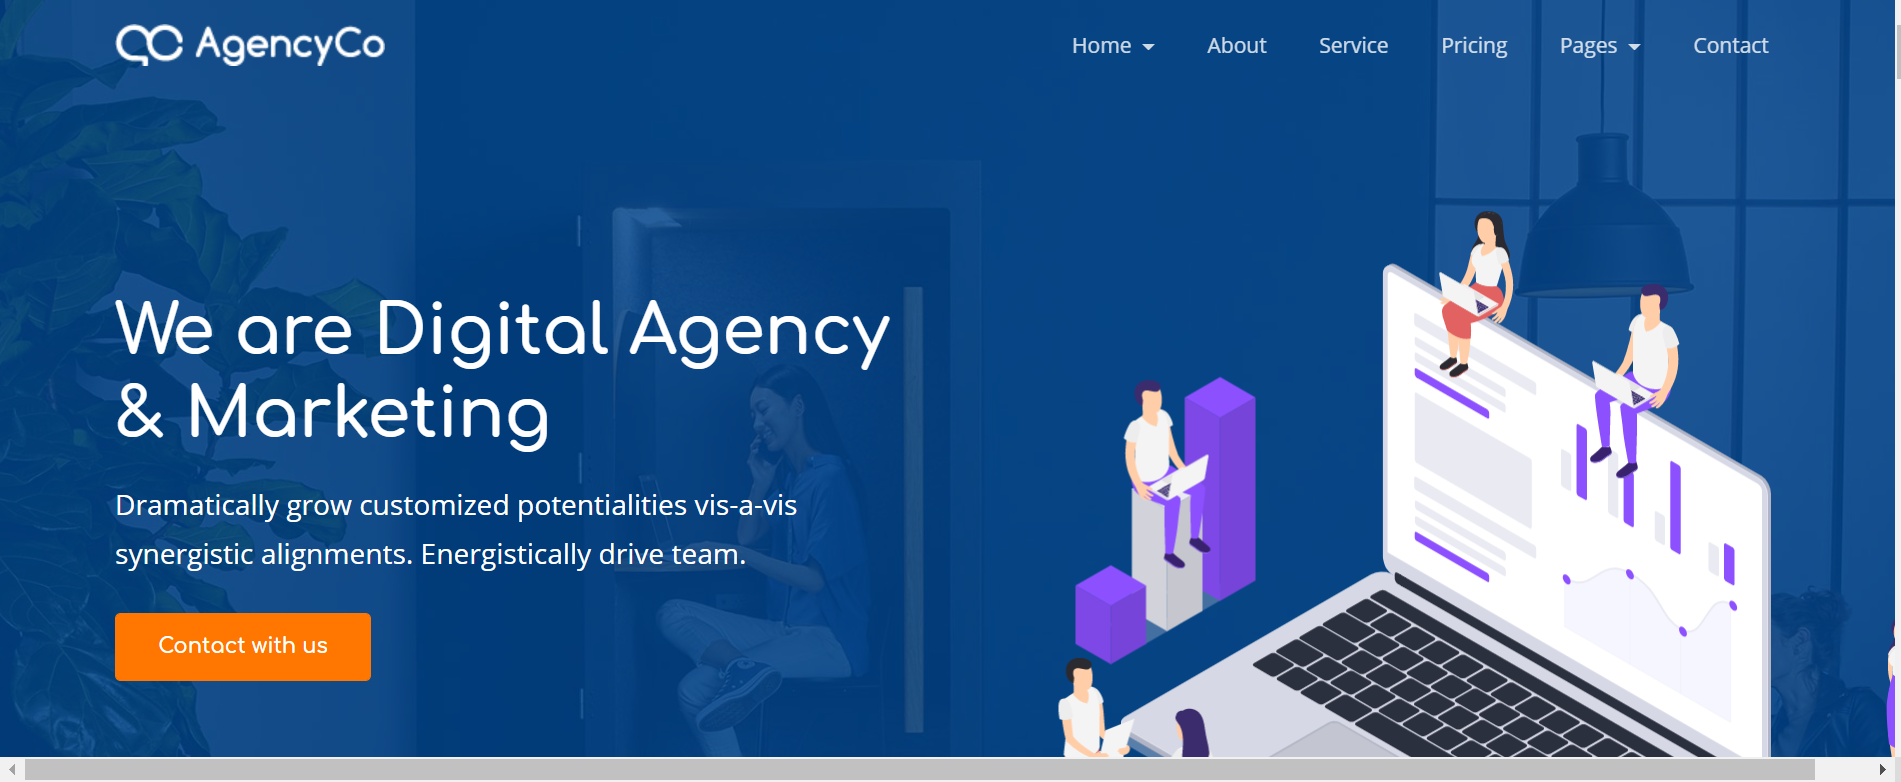 AgencyCo-Digital-Agency-and-Marketing-Template.png